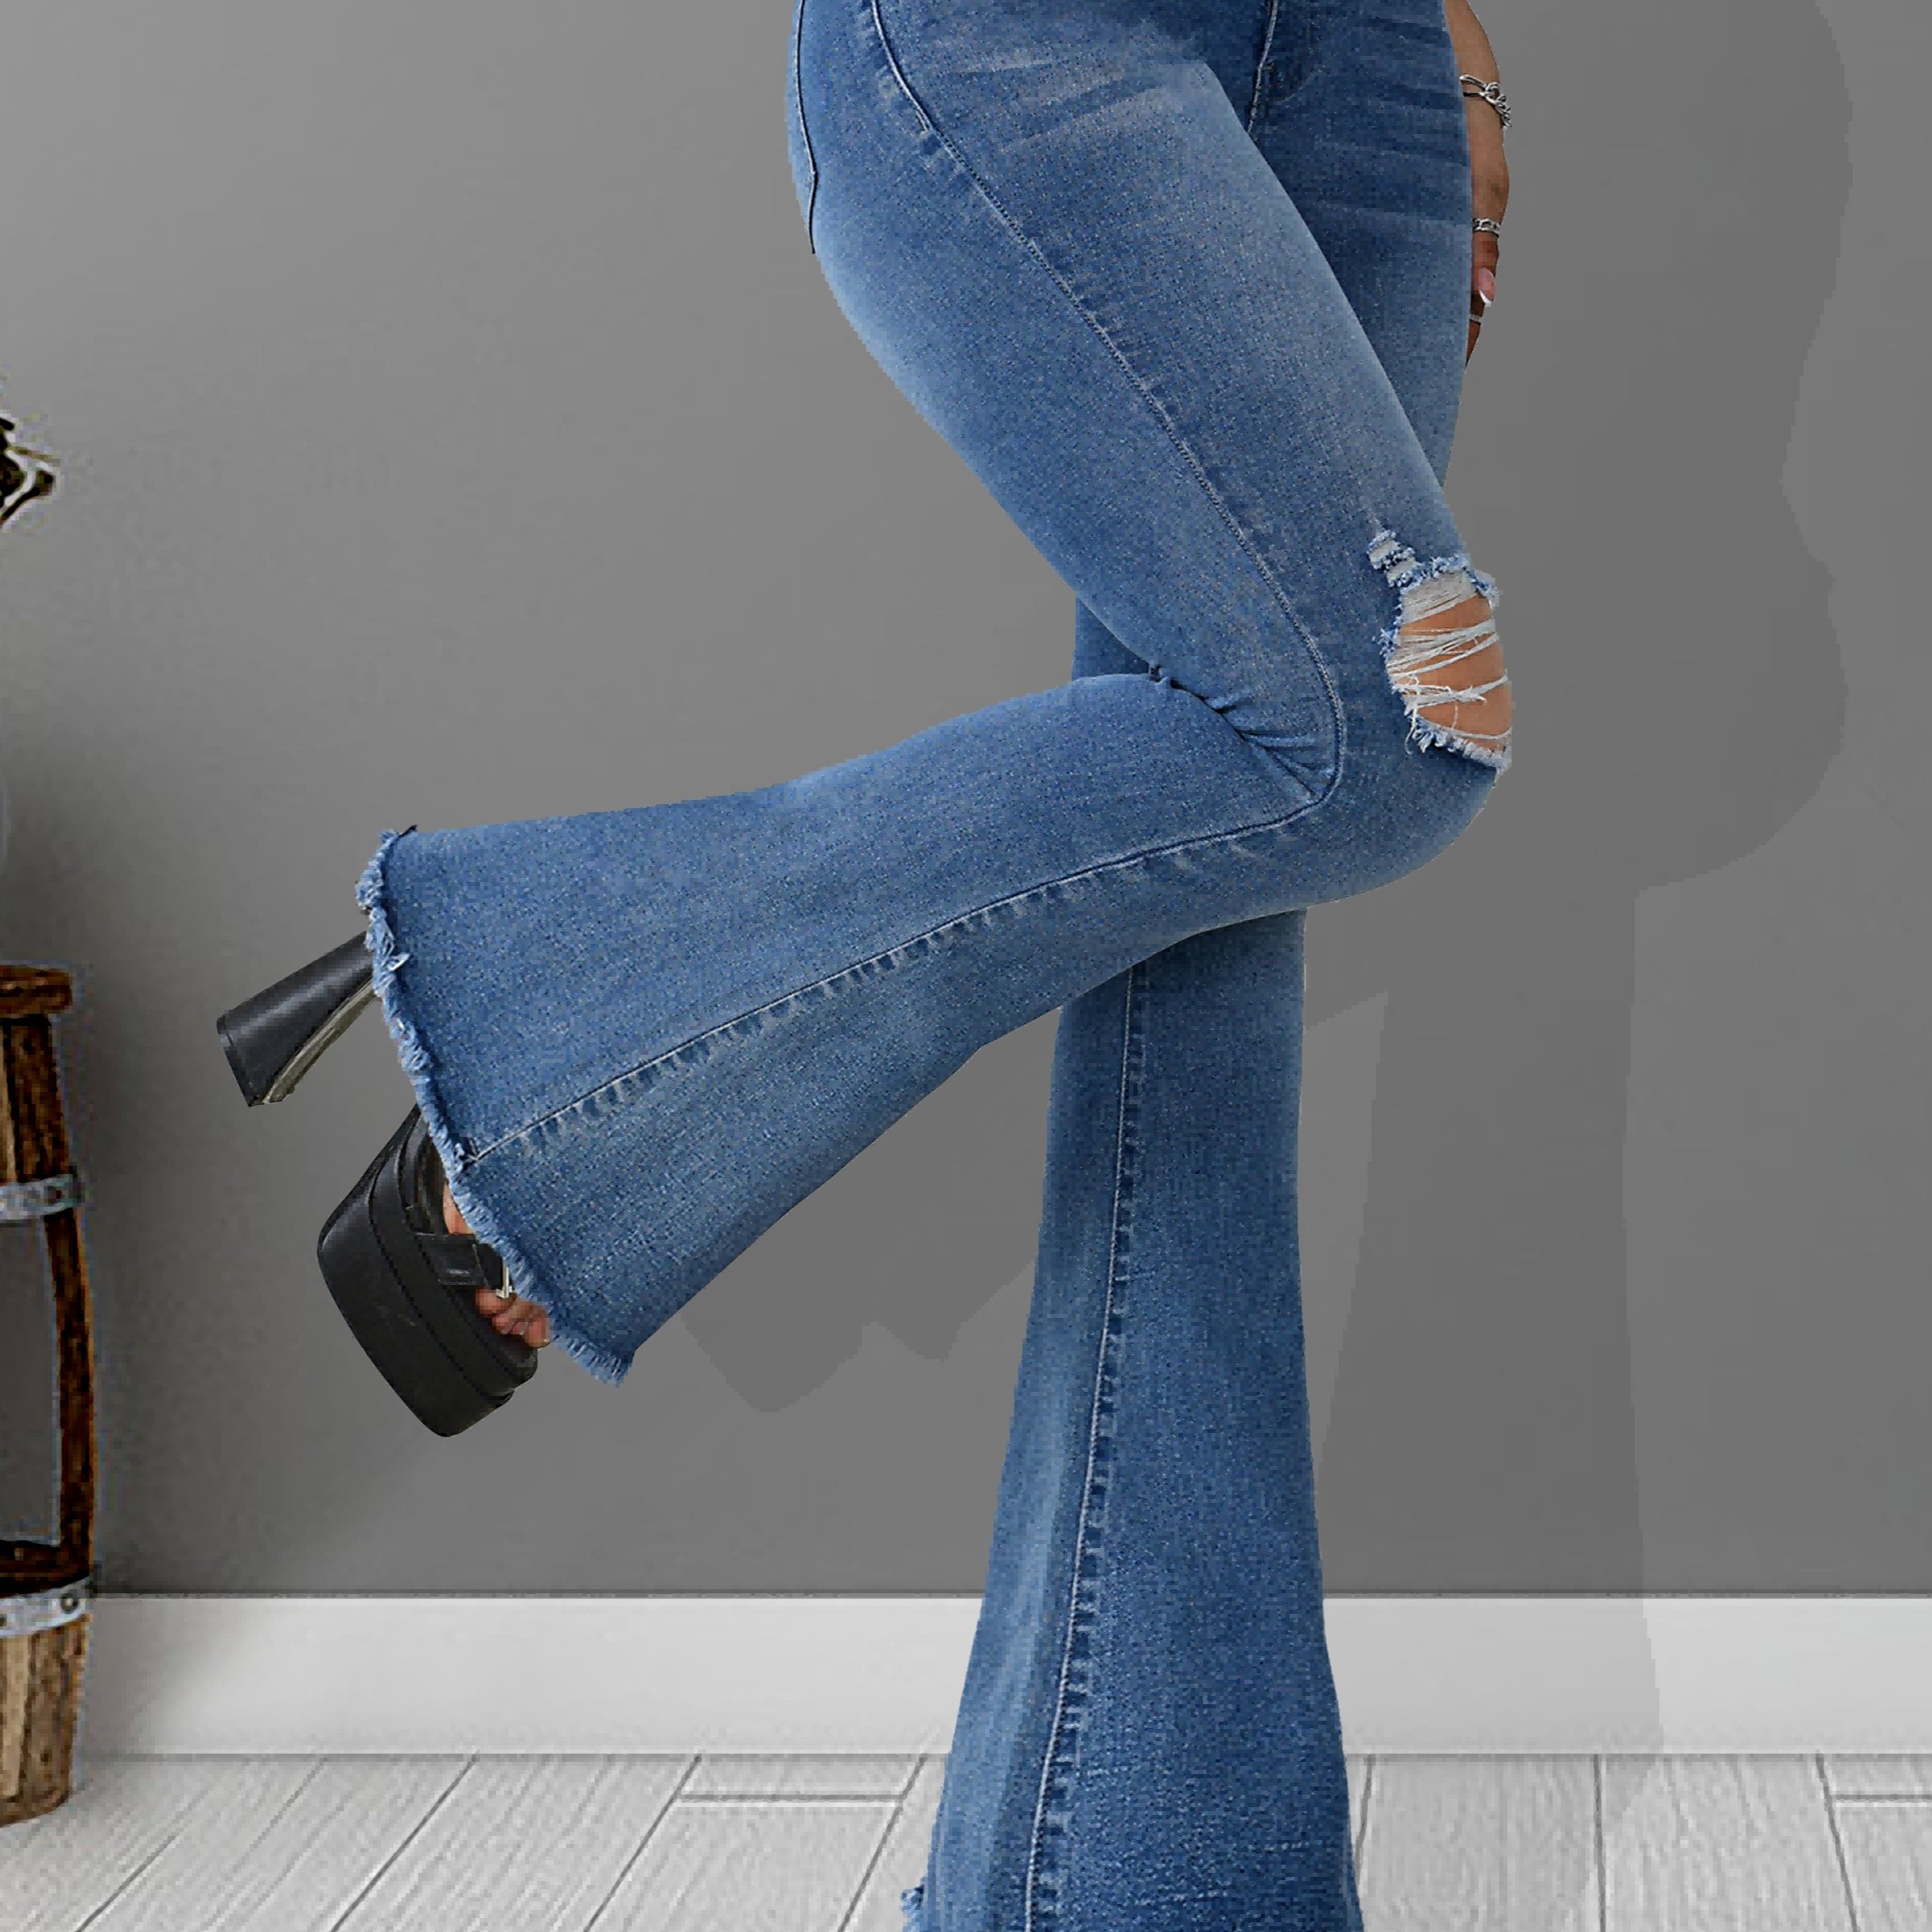 TheyLook Womens Denim Stretch Flare Jeans Frayed High Split Bell Bottom  Pants with Ripped Hole at  Women's Jeans store